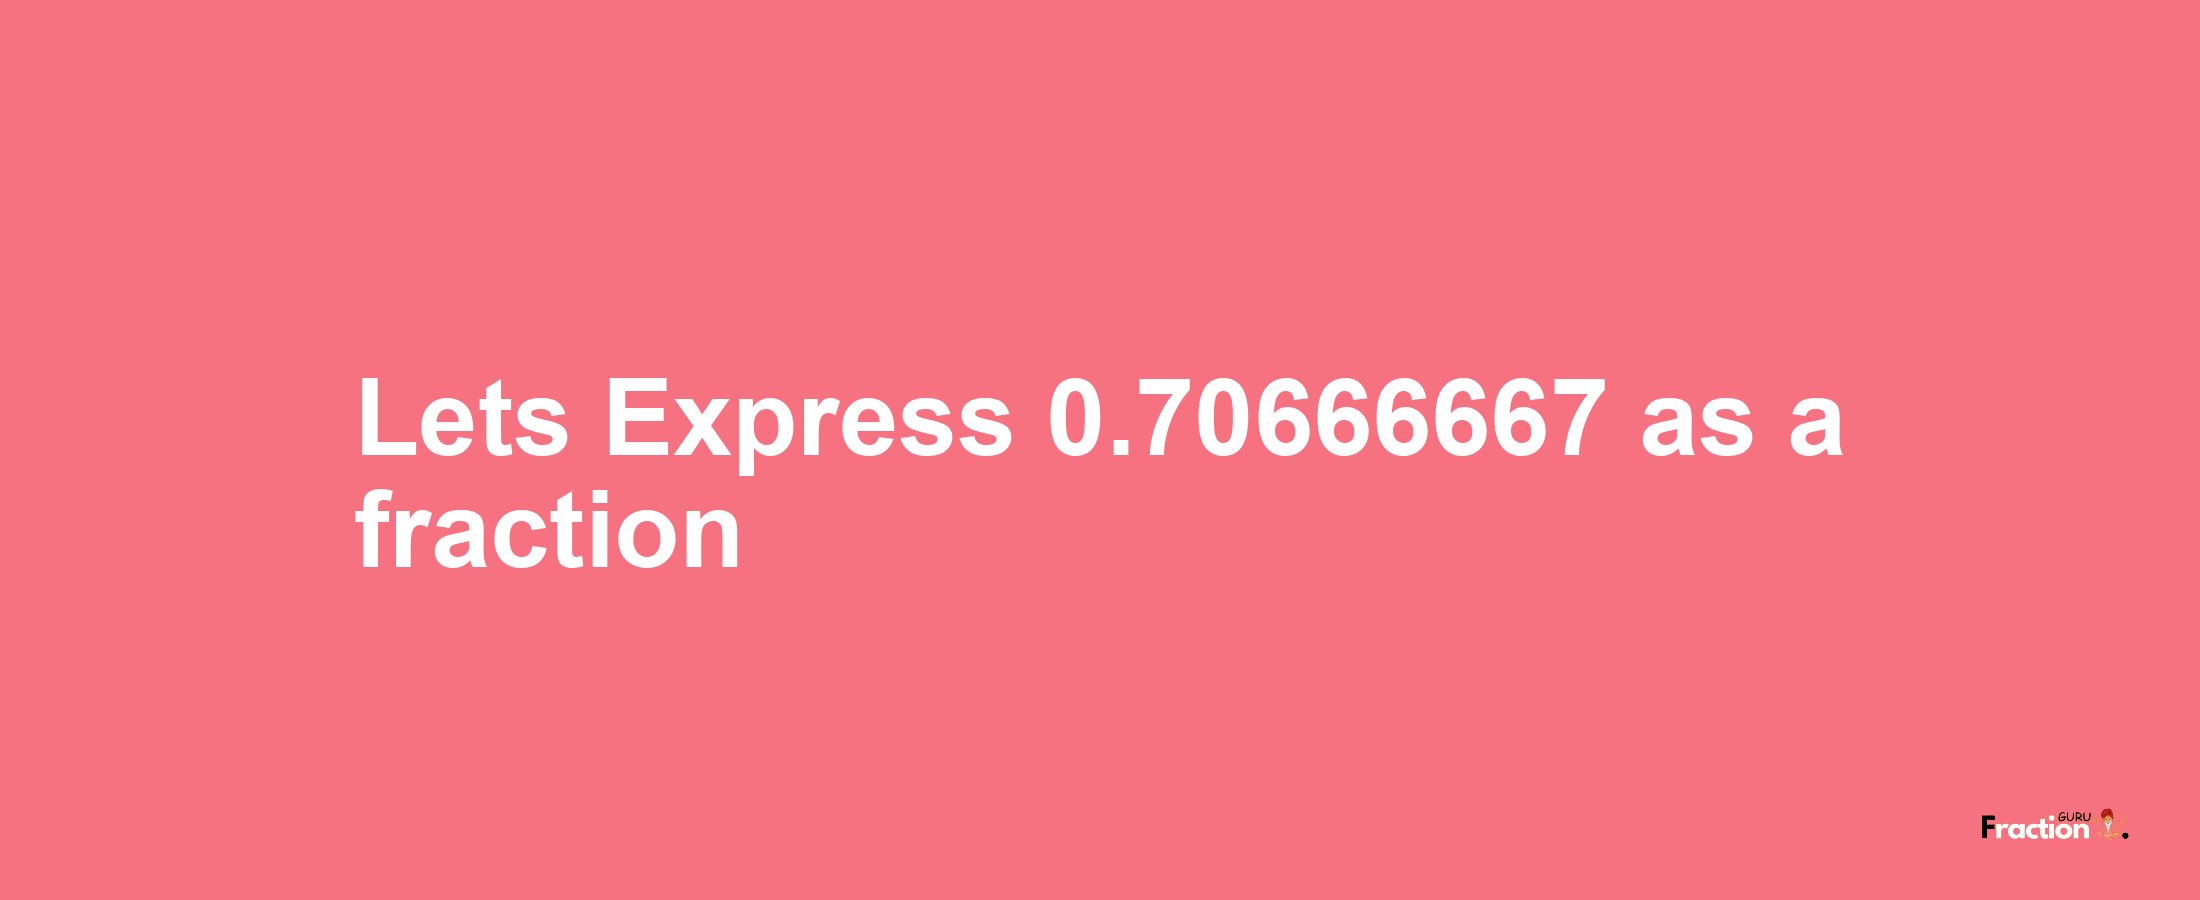 Lets Express 0.70666667 as afraction